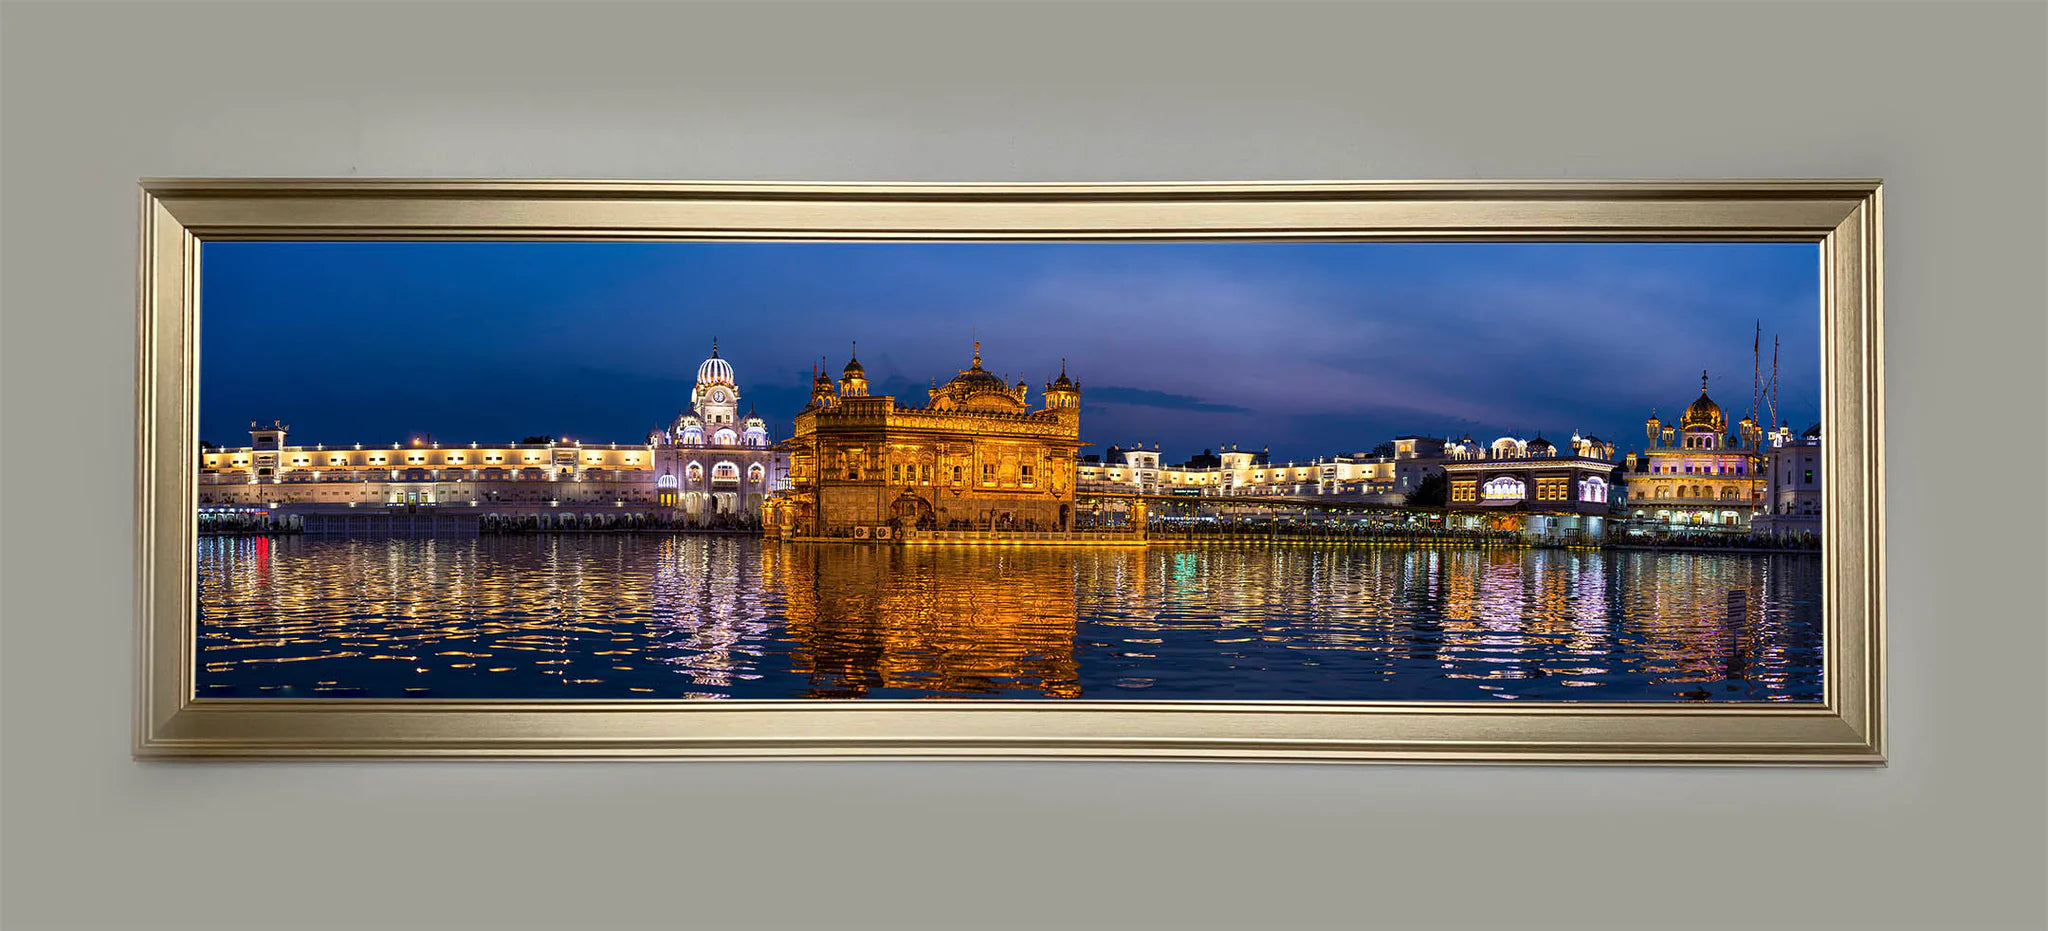 Limited Edition Numbered Canvas Print of the Golden Temple 72" x 24"